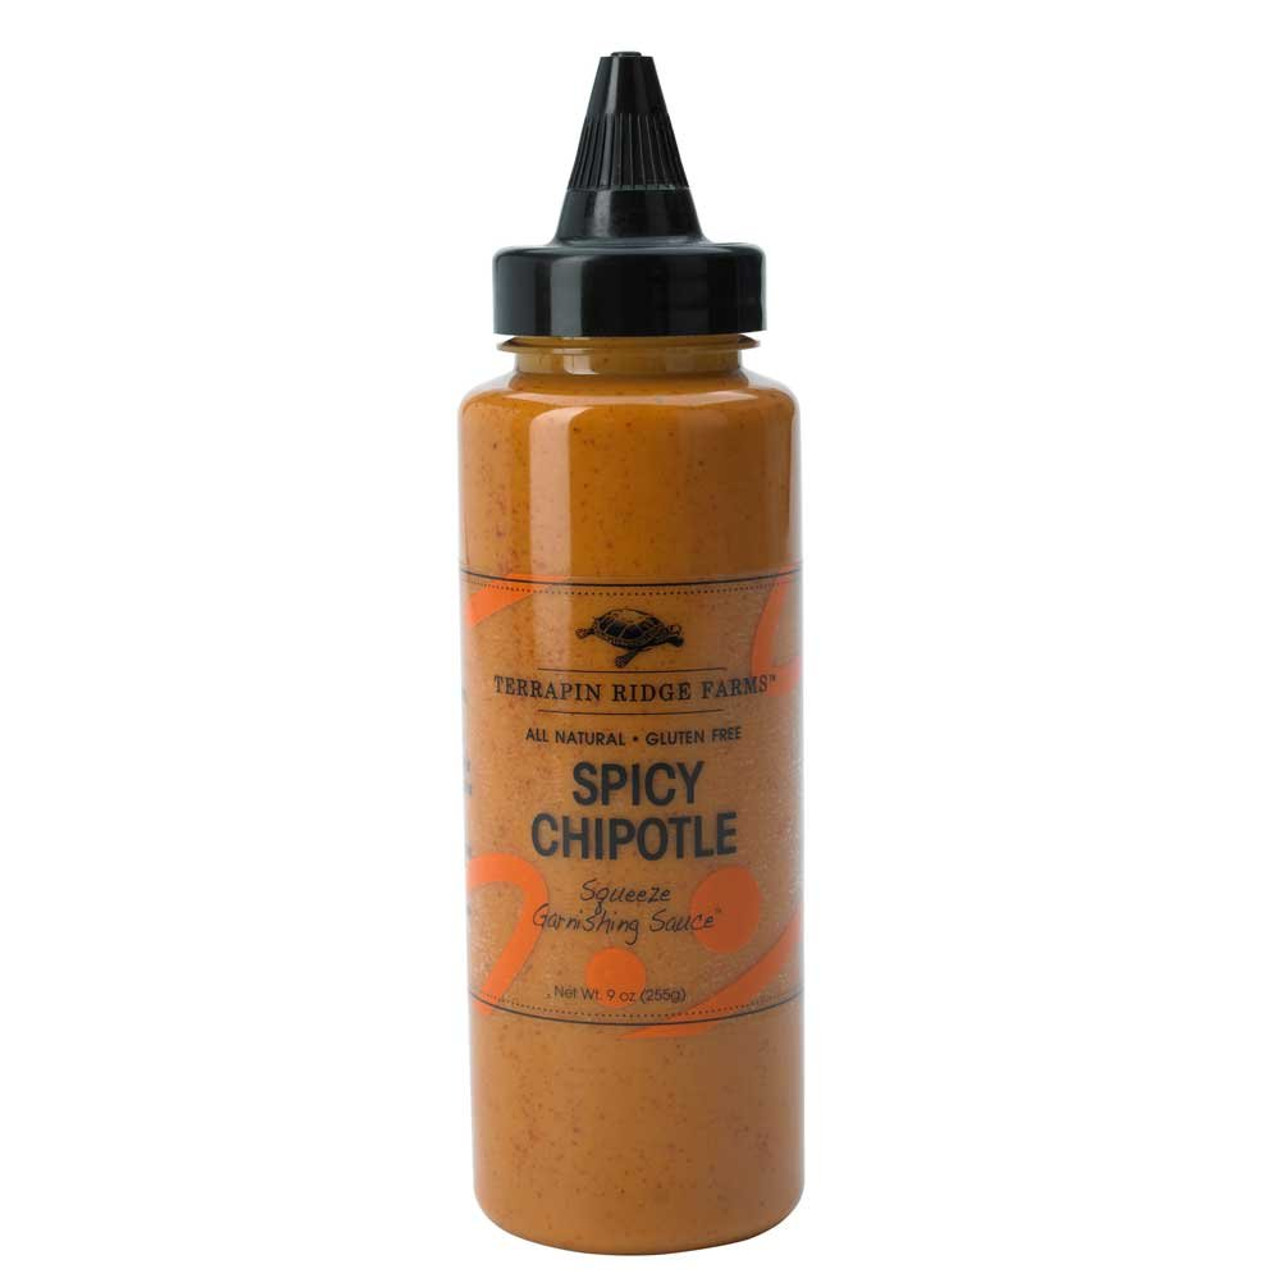 Small 5 Bottle Combo - Original, Spicy, Chipotle, Crunchy, & Cheesoning